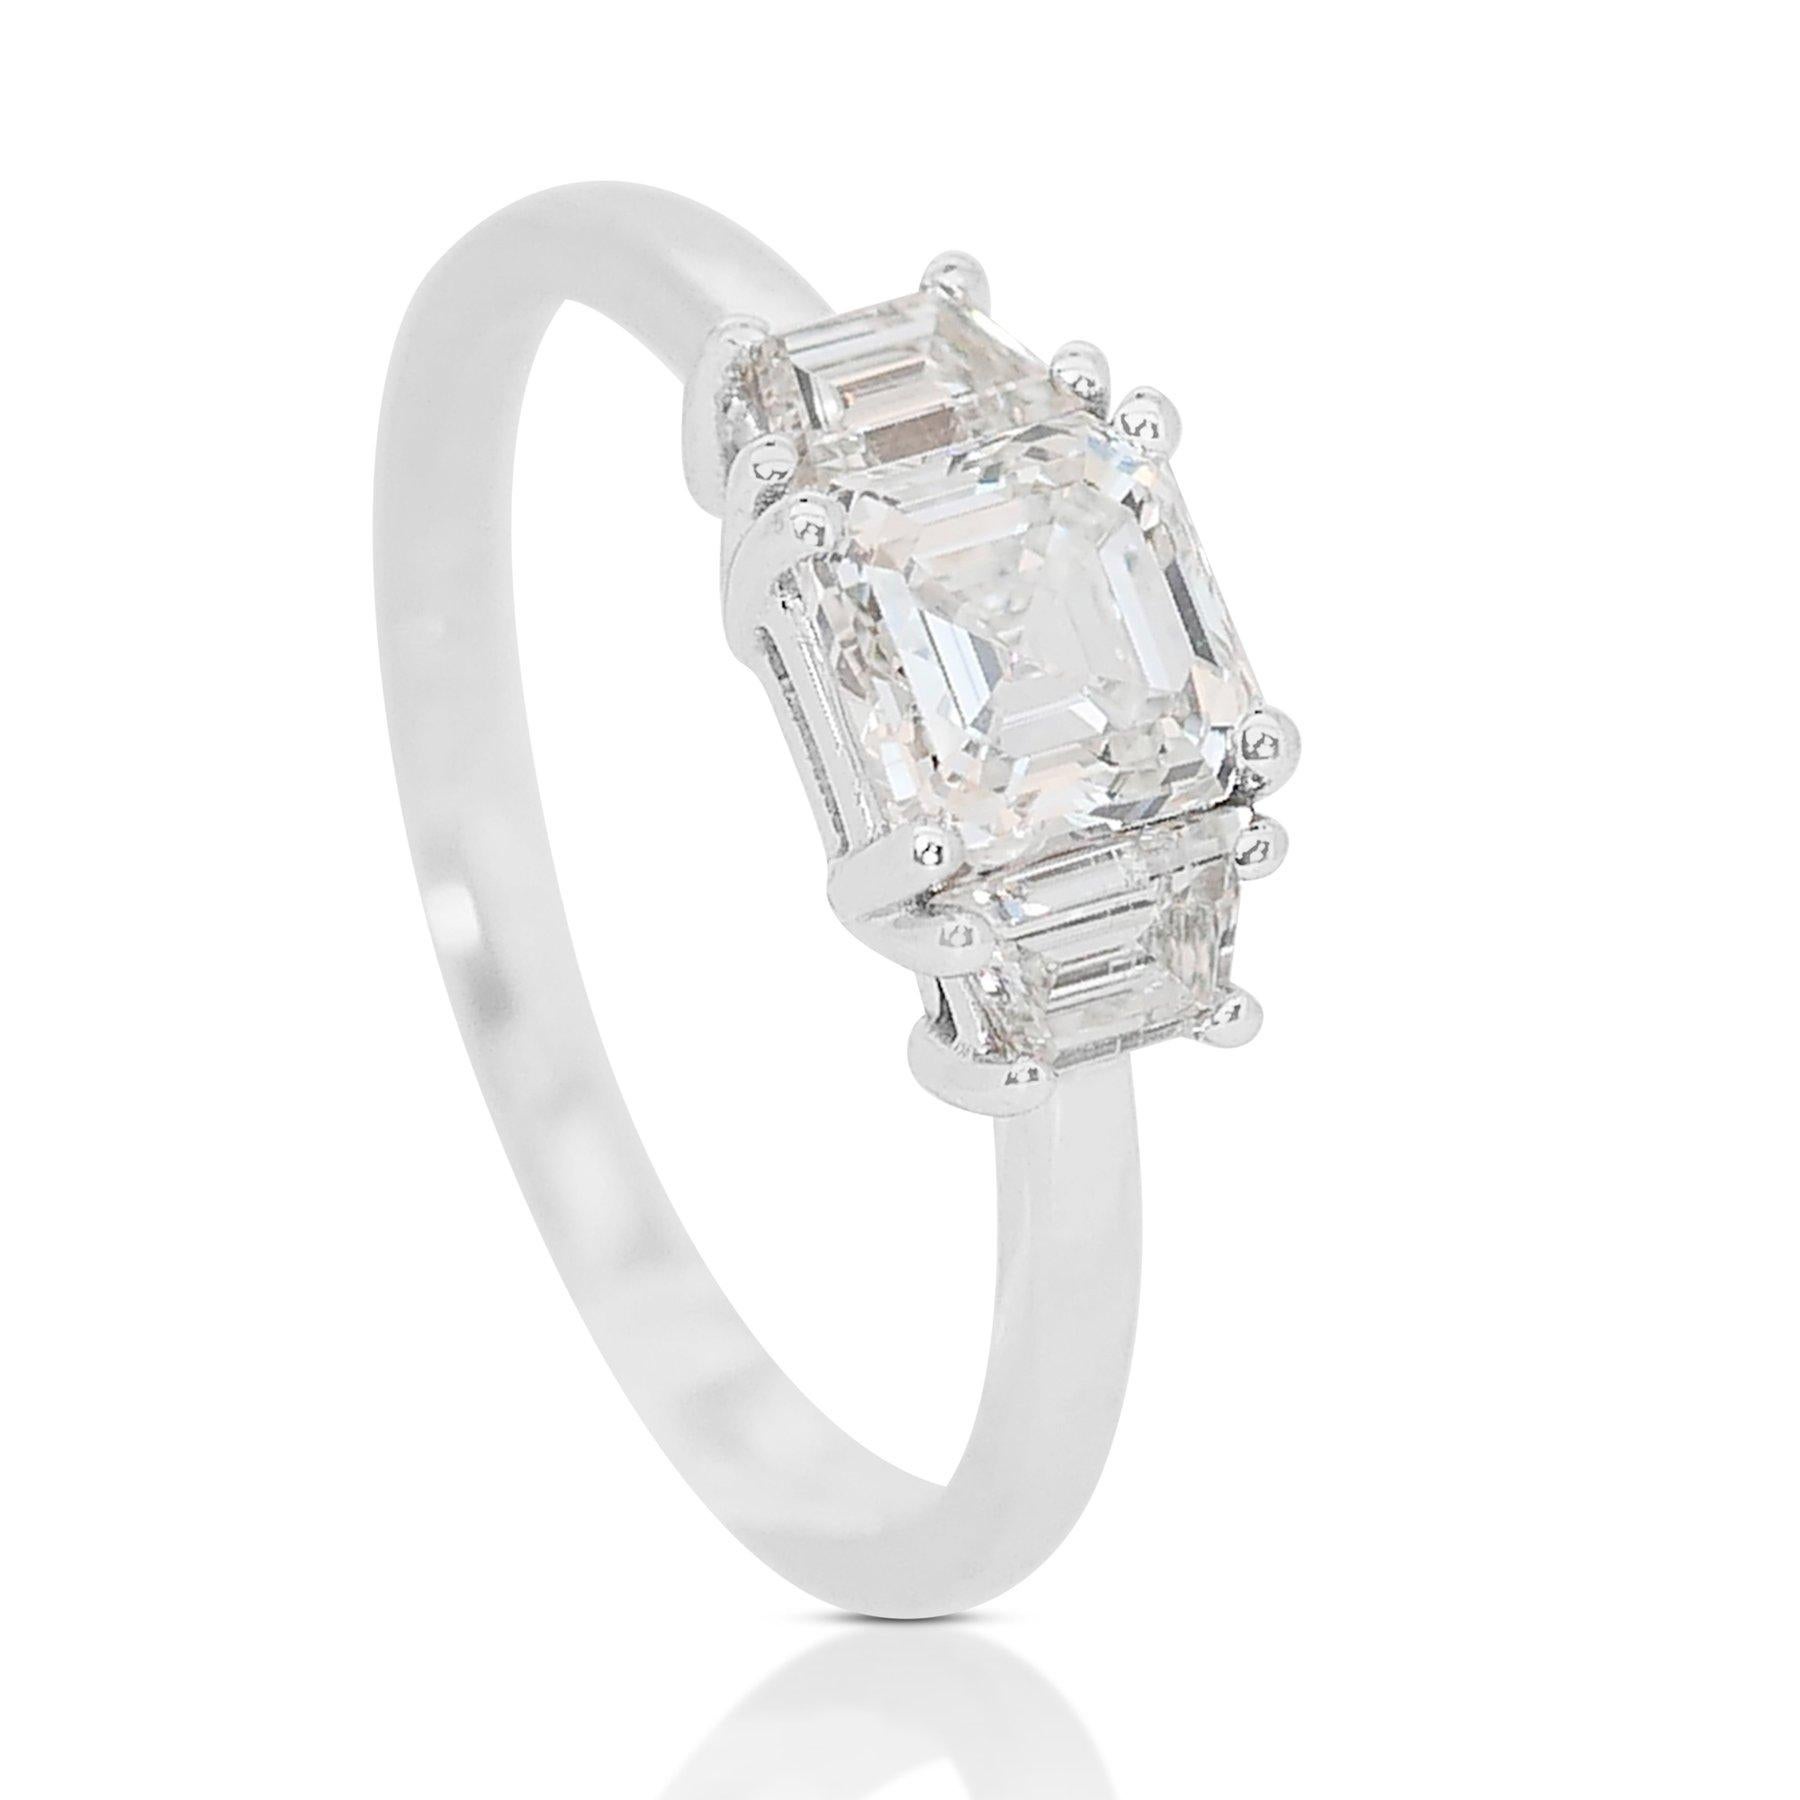 Sophisticated 1.64ct Diamond 3-Stone Ring in 18k White Gold - GIA Certified

Embrace the essence of sophistication with this 3-stone diamond ring masterfully crafted from 18k white gold. This exquisite ring centers around a pristine 1.00-carat